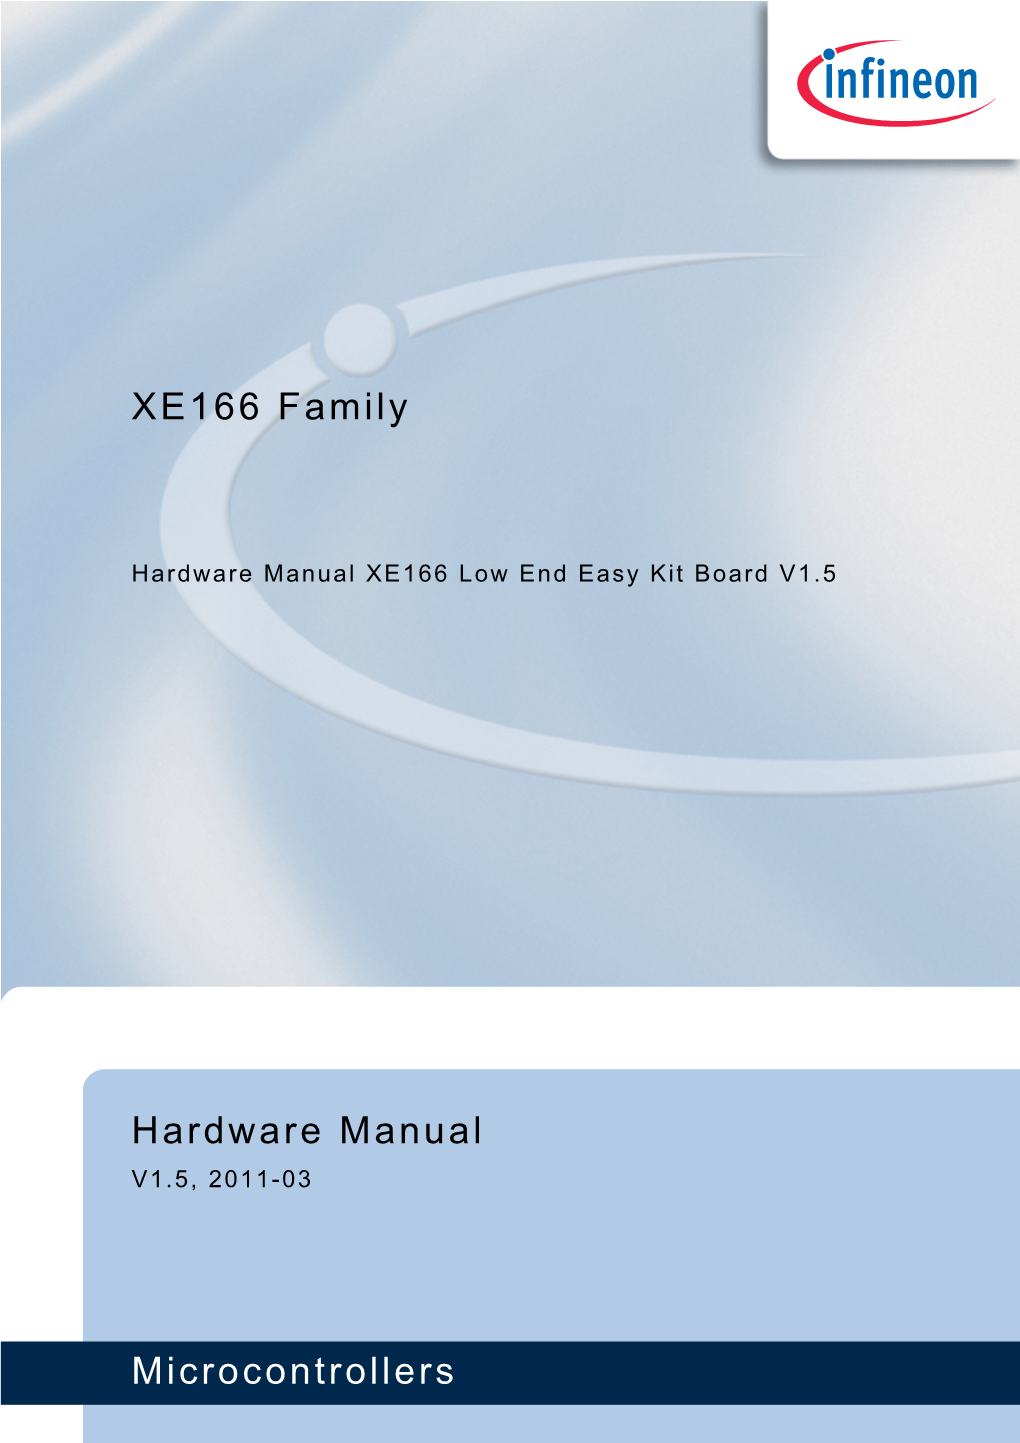 XE166 Family Microcontrollers Hardware Manual